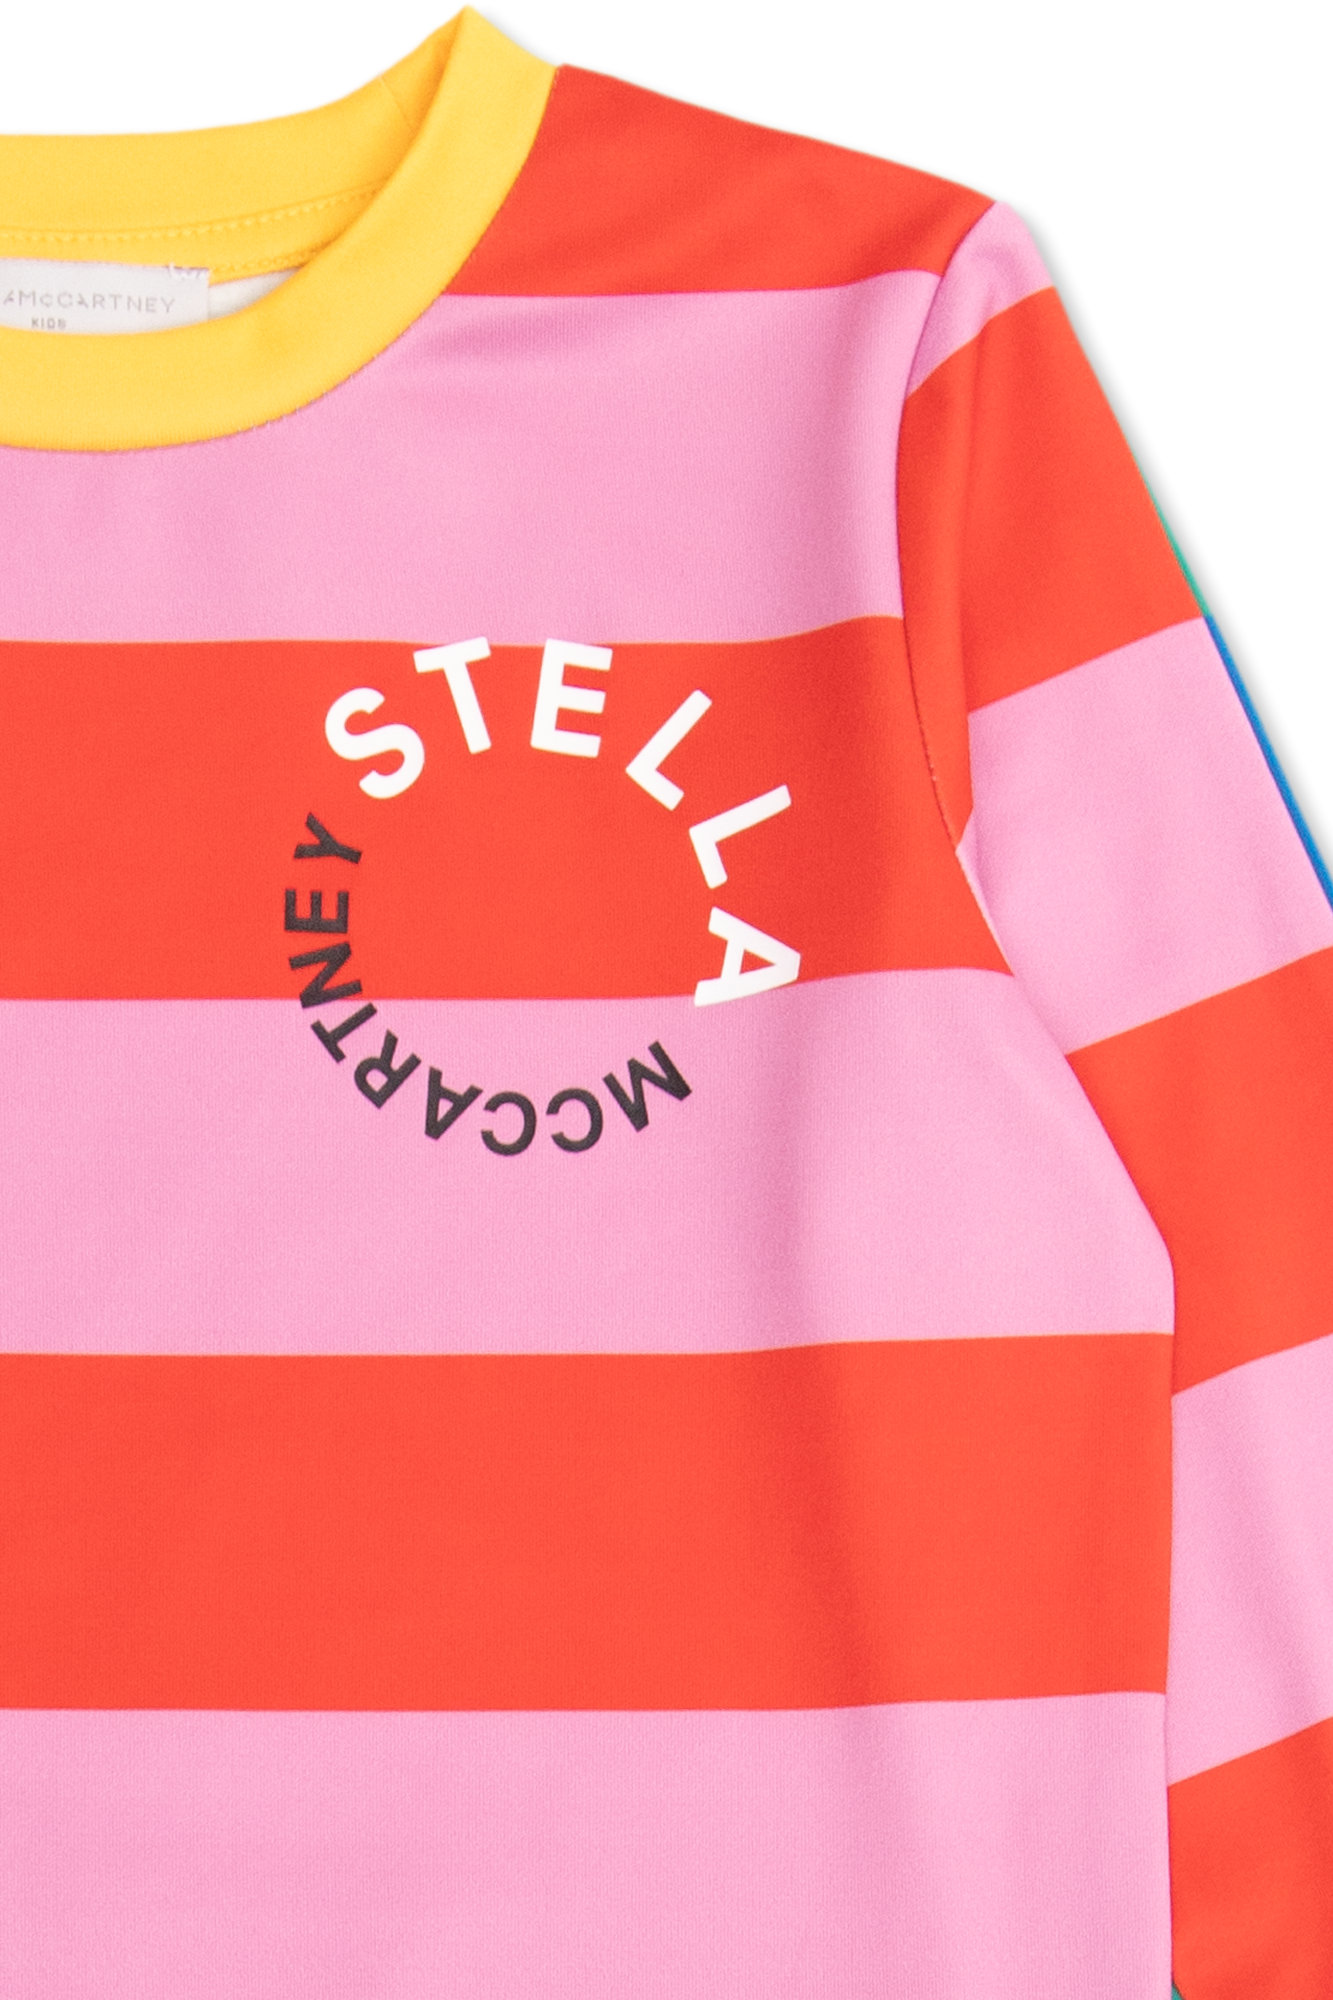 Stella McCartney Kids Thermal top and trousers set